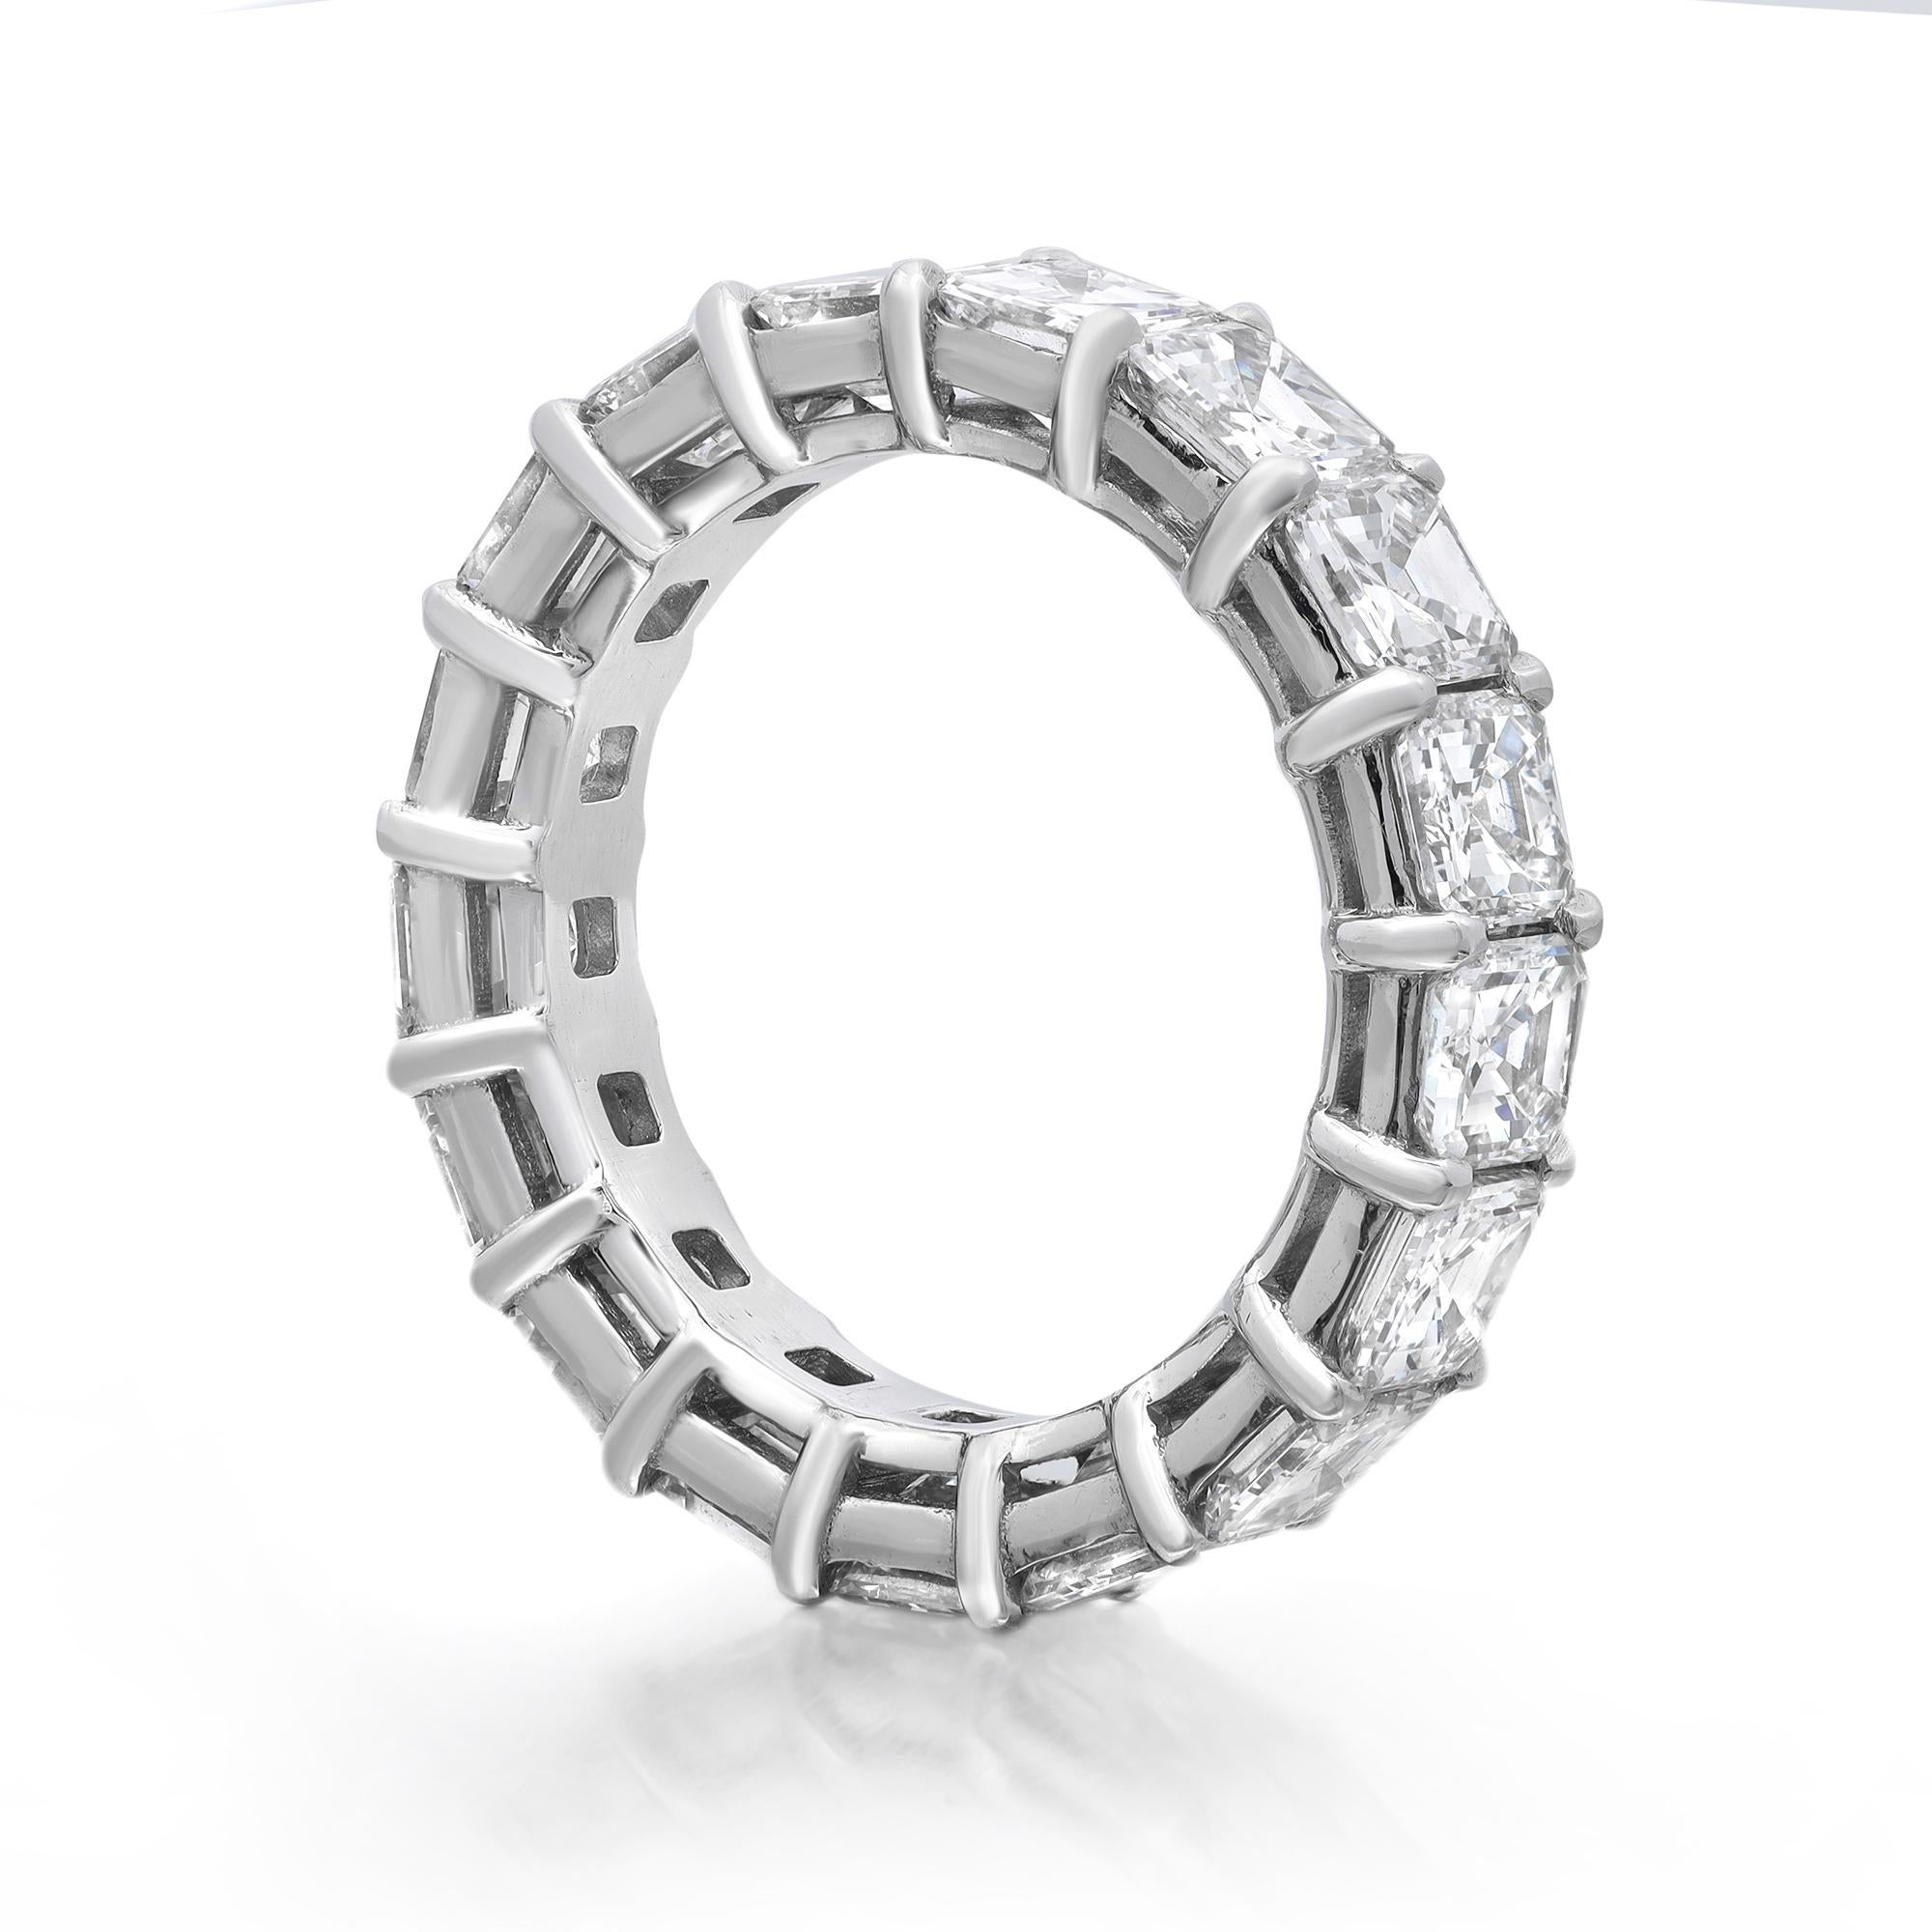 This diamond eternity band ring is a beautiful take on a classic style. It features 17 Asscher cut sparkling diamonds encrusted in prong setting. Crafted in platinum. Total diamond weight: 5.67 carats. Diamond quality: color G-H and clarity VS-SI.